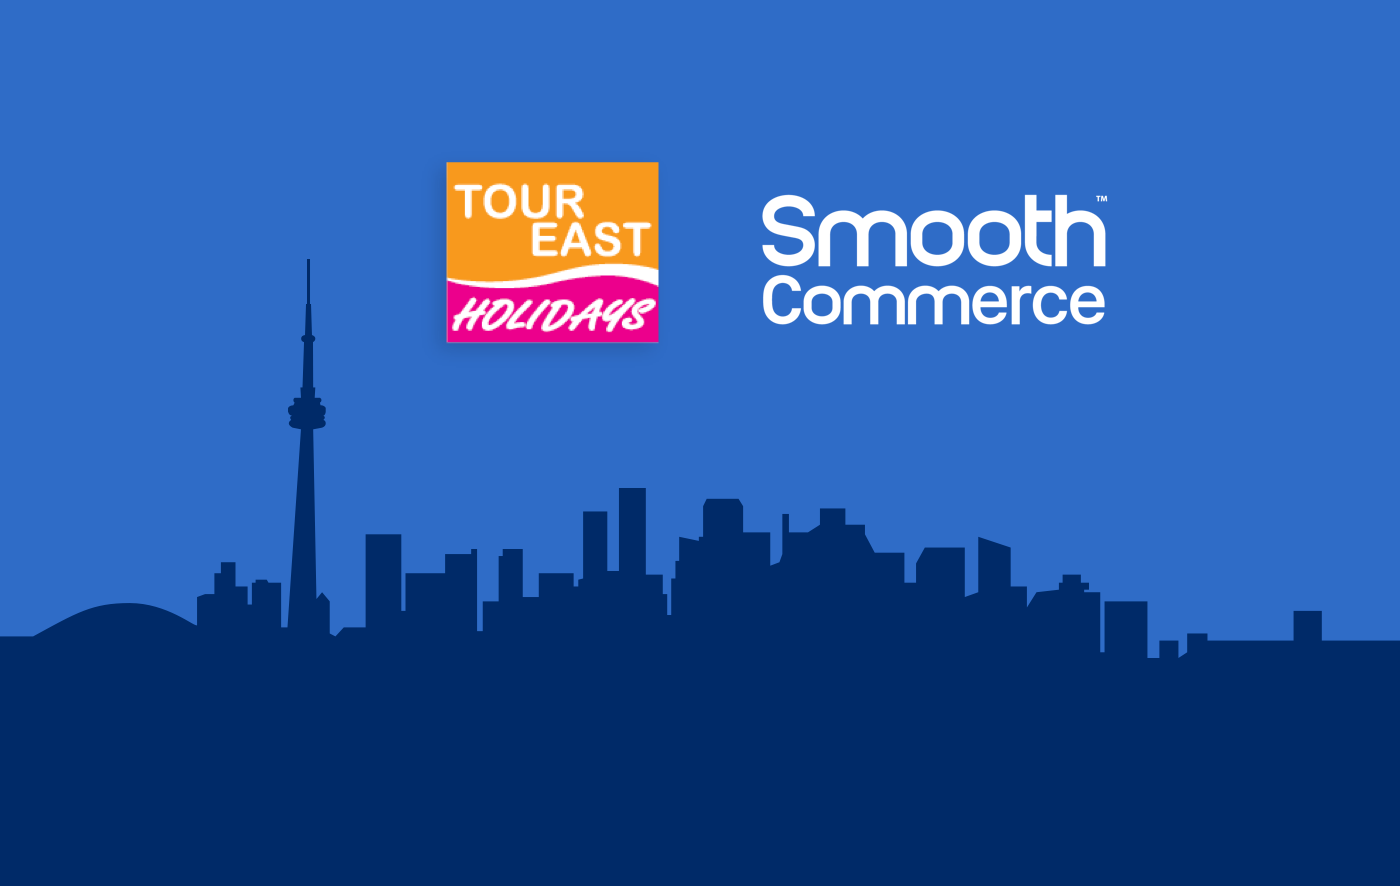 Tour East and Smooth Commerce logos